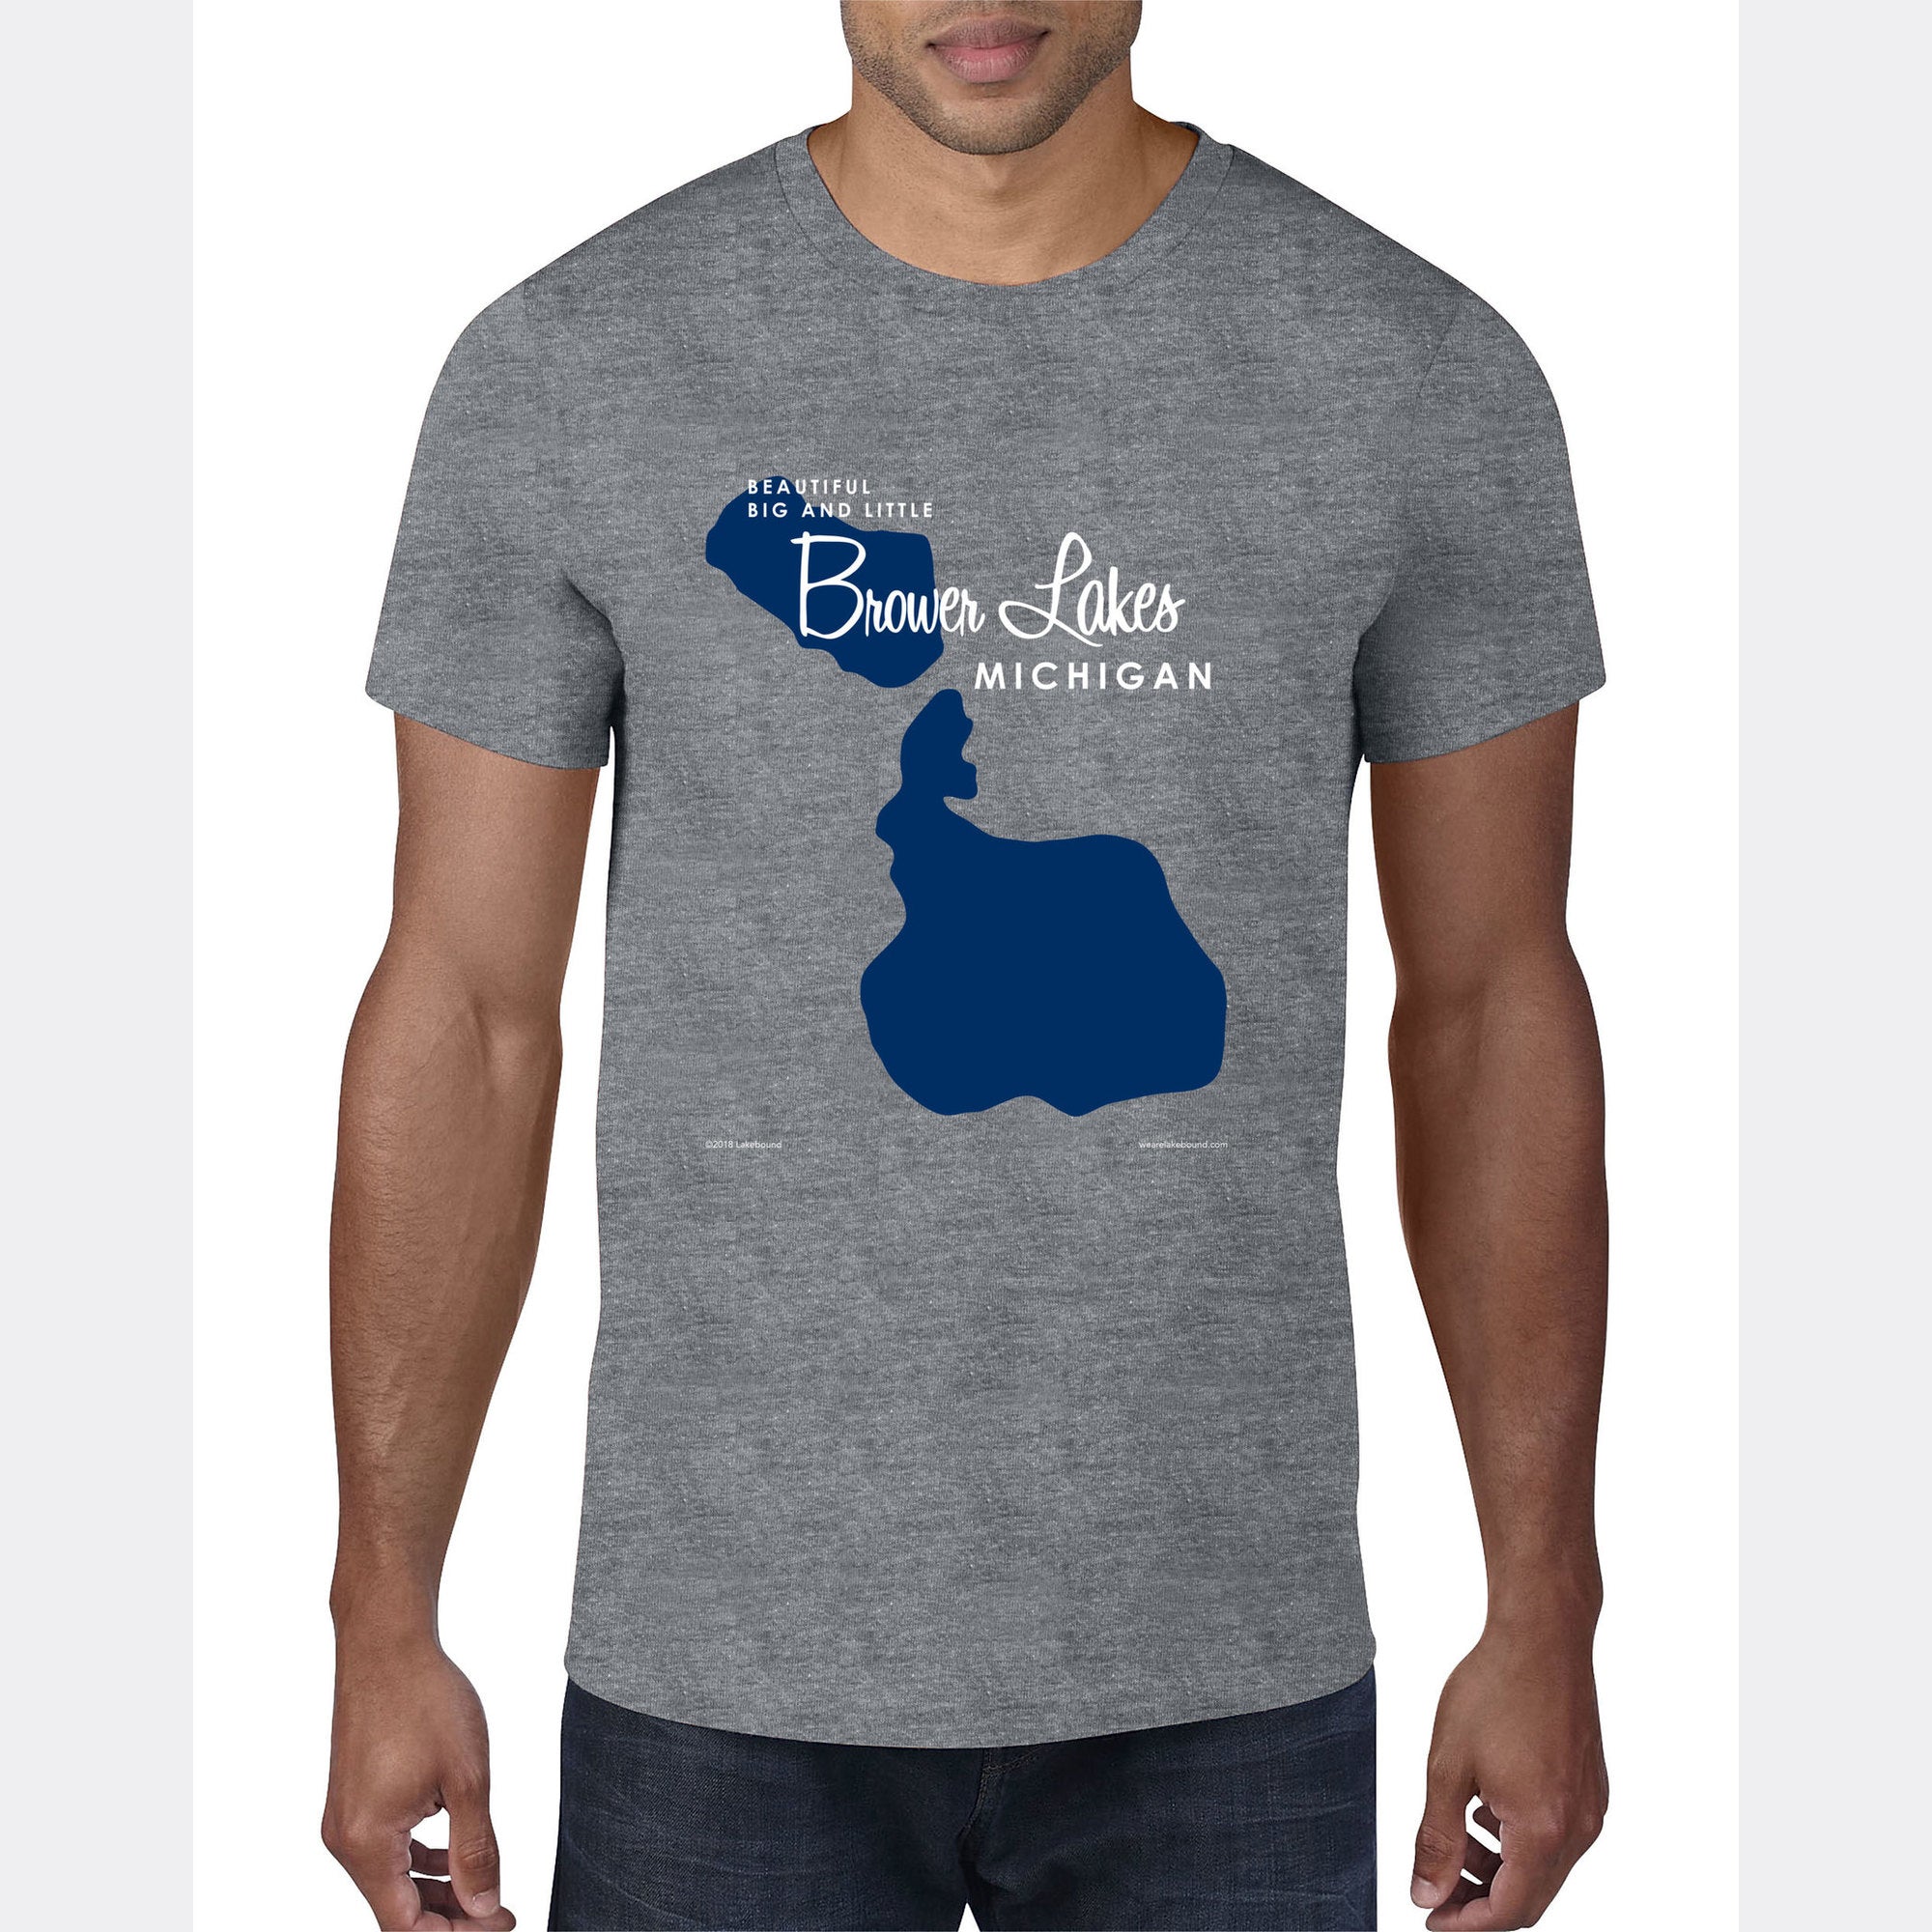 Big and Little Brower Lakes Michigan, T-Shirt